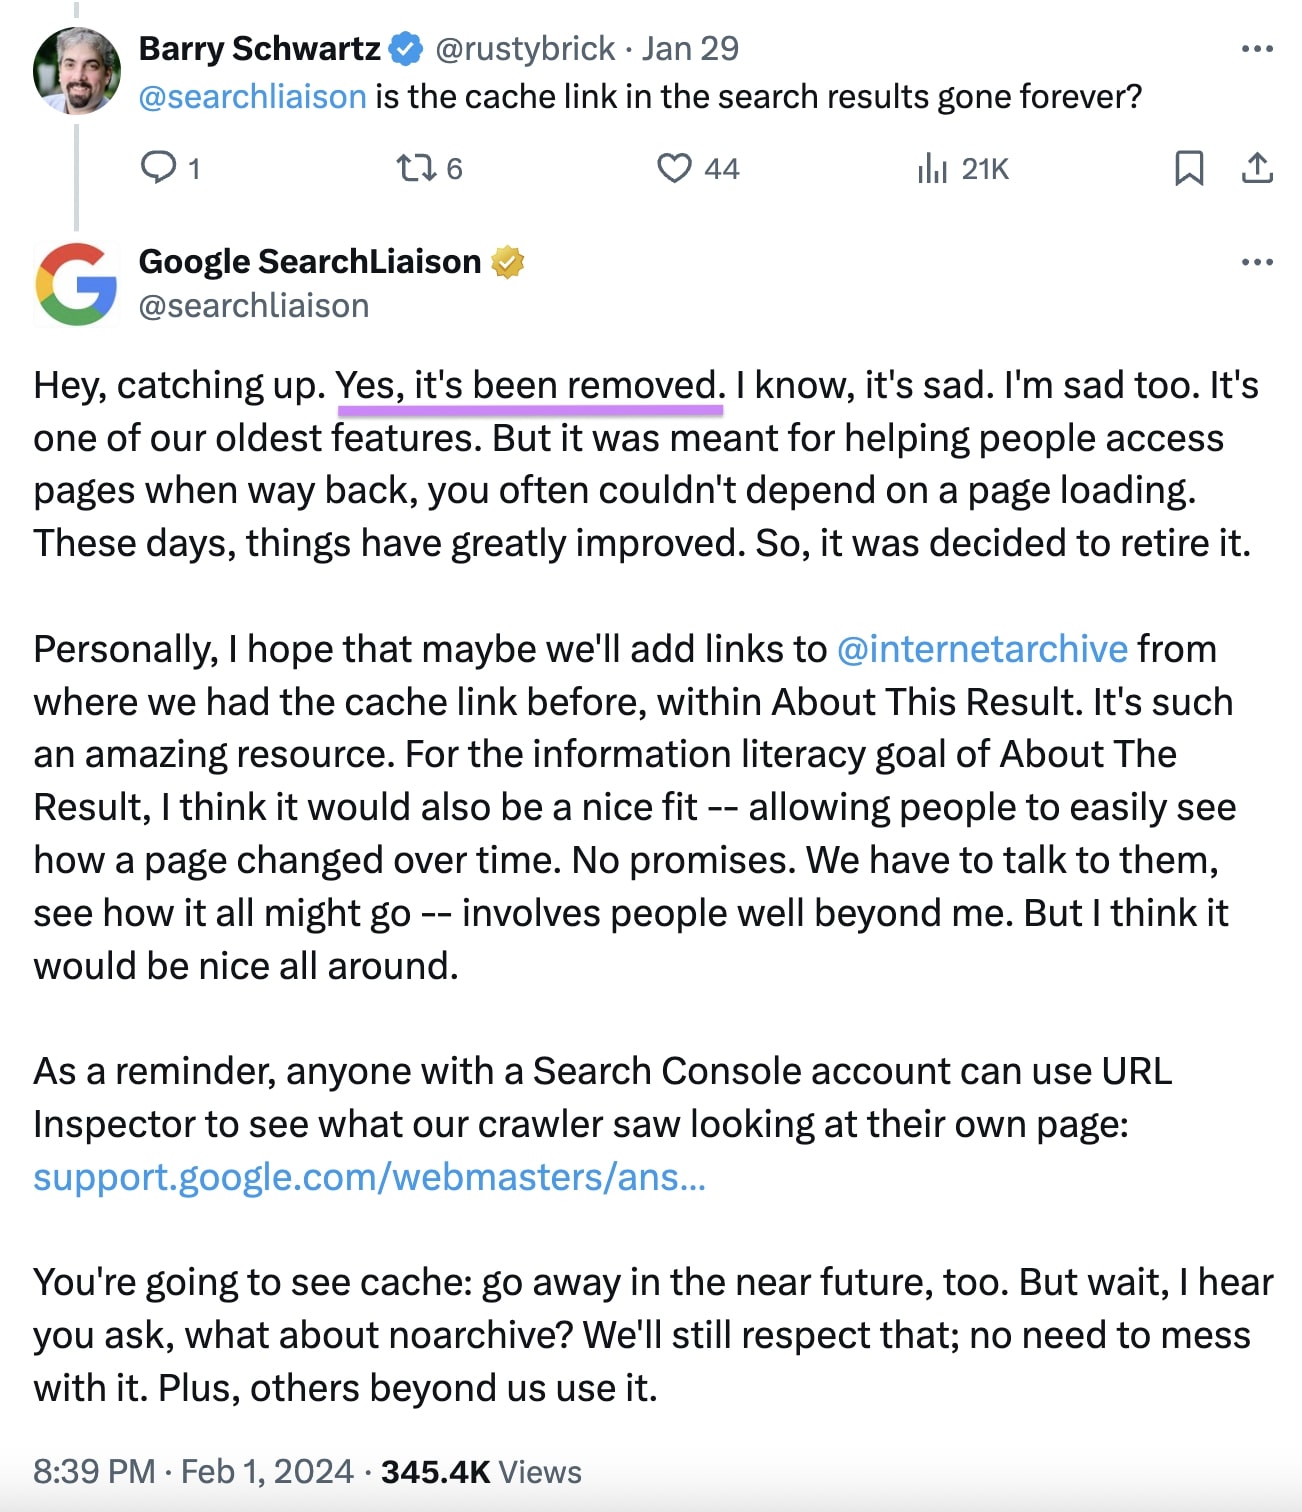 Google Search Liaison's post on X confirming that the search engine had removed the “Cached” links from its SERPs